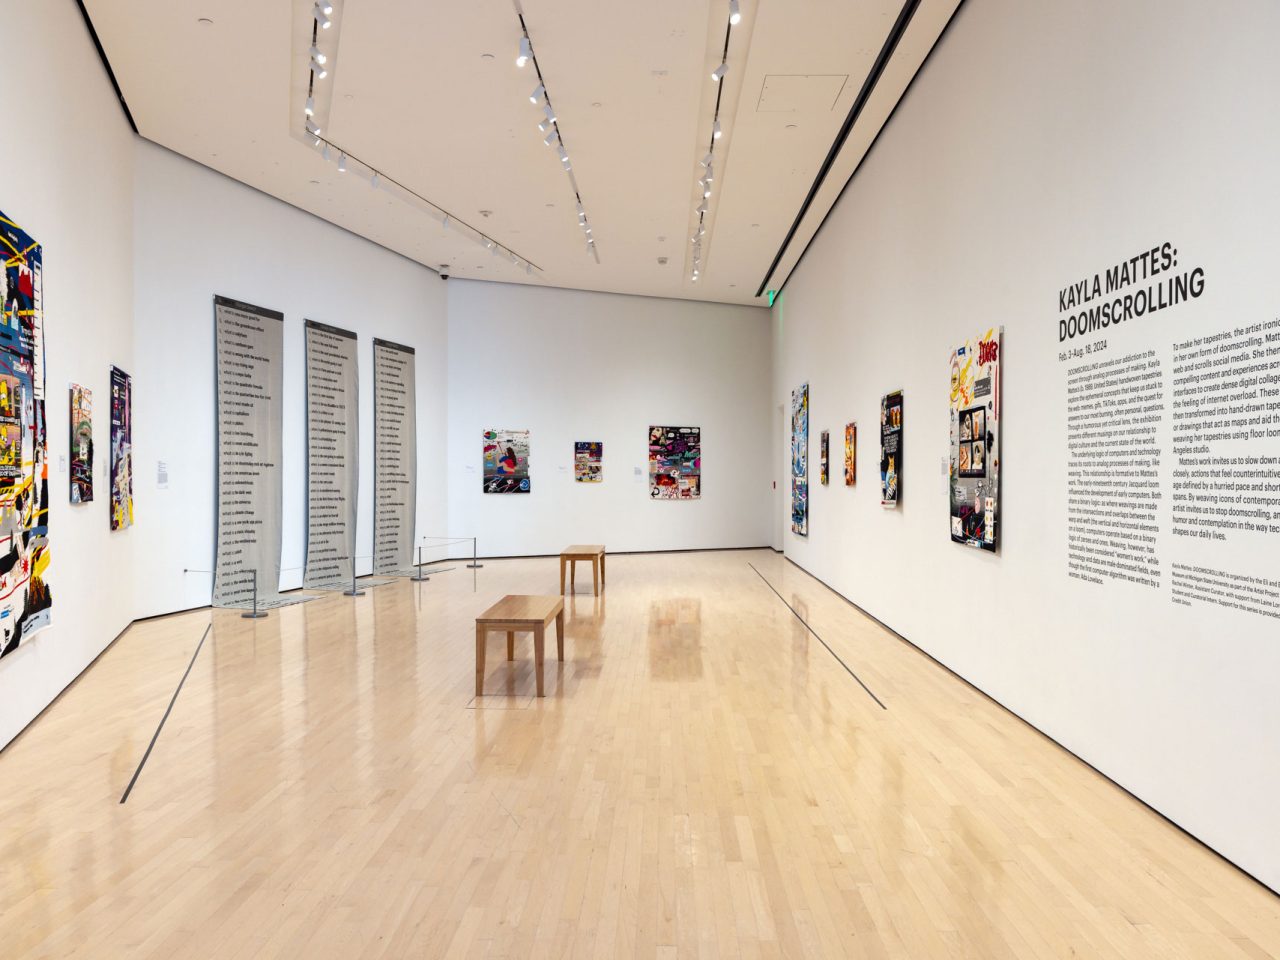 Wide angle of DOOMSCROLLING gallery showcasing woven art